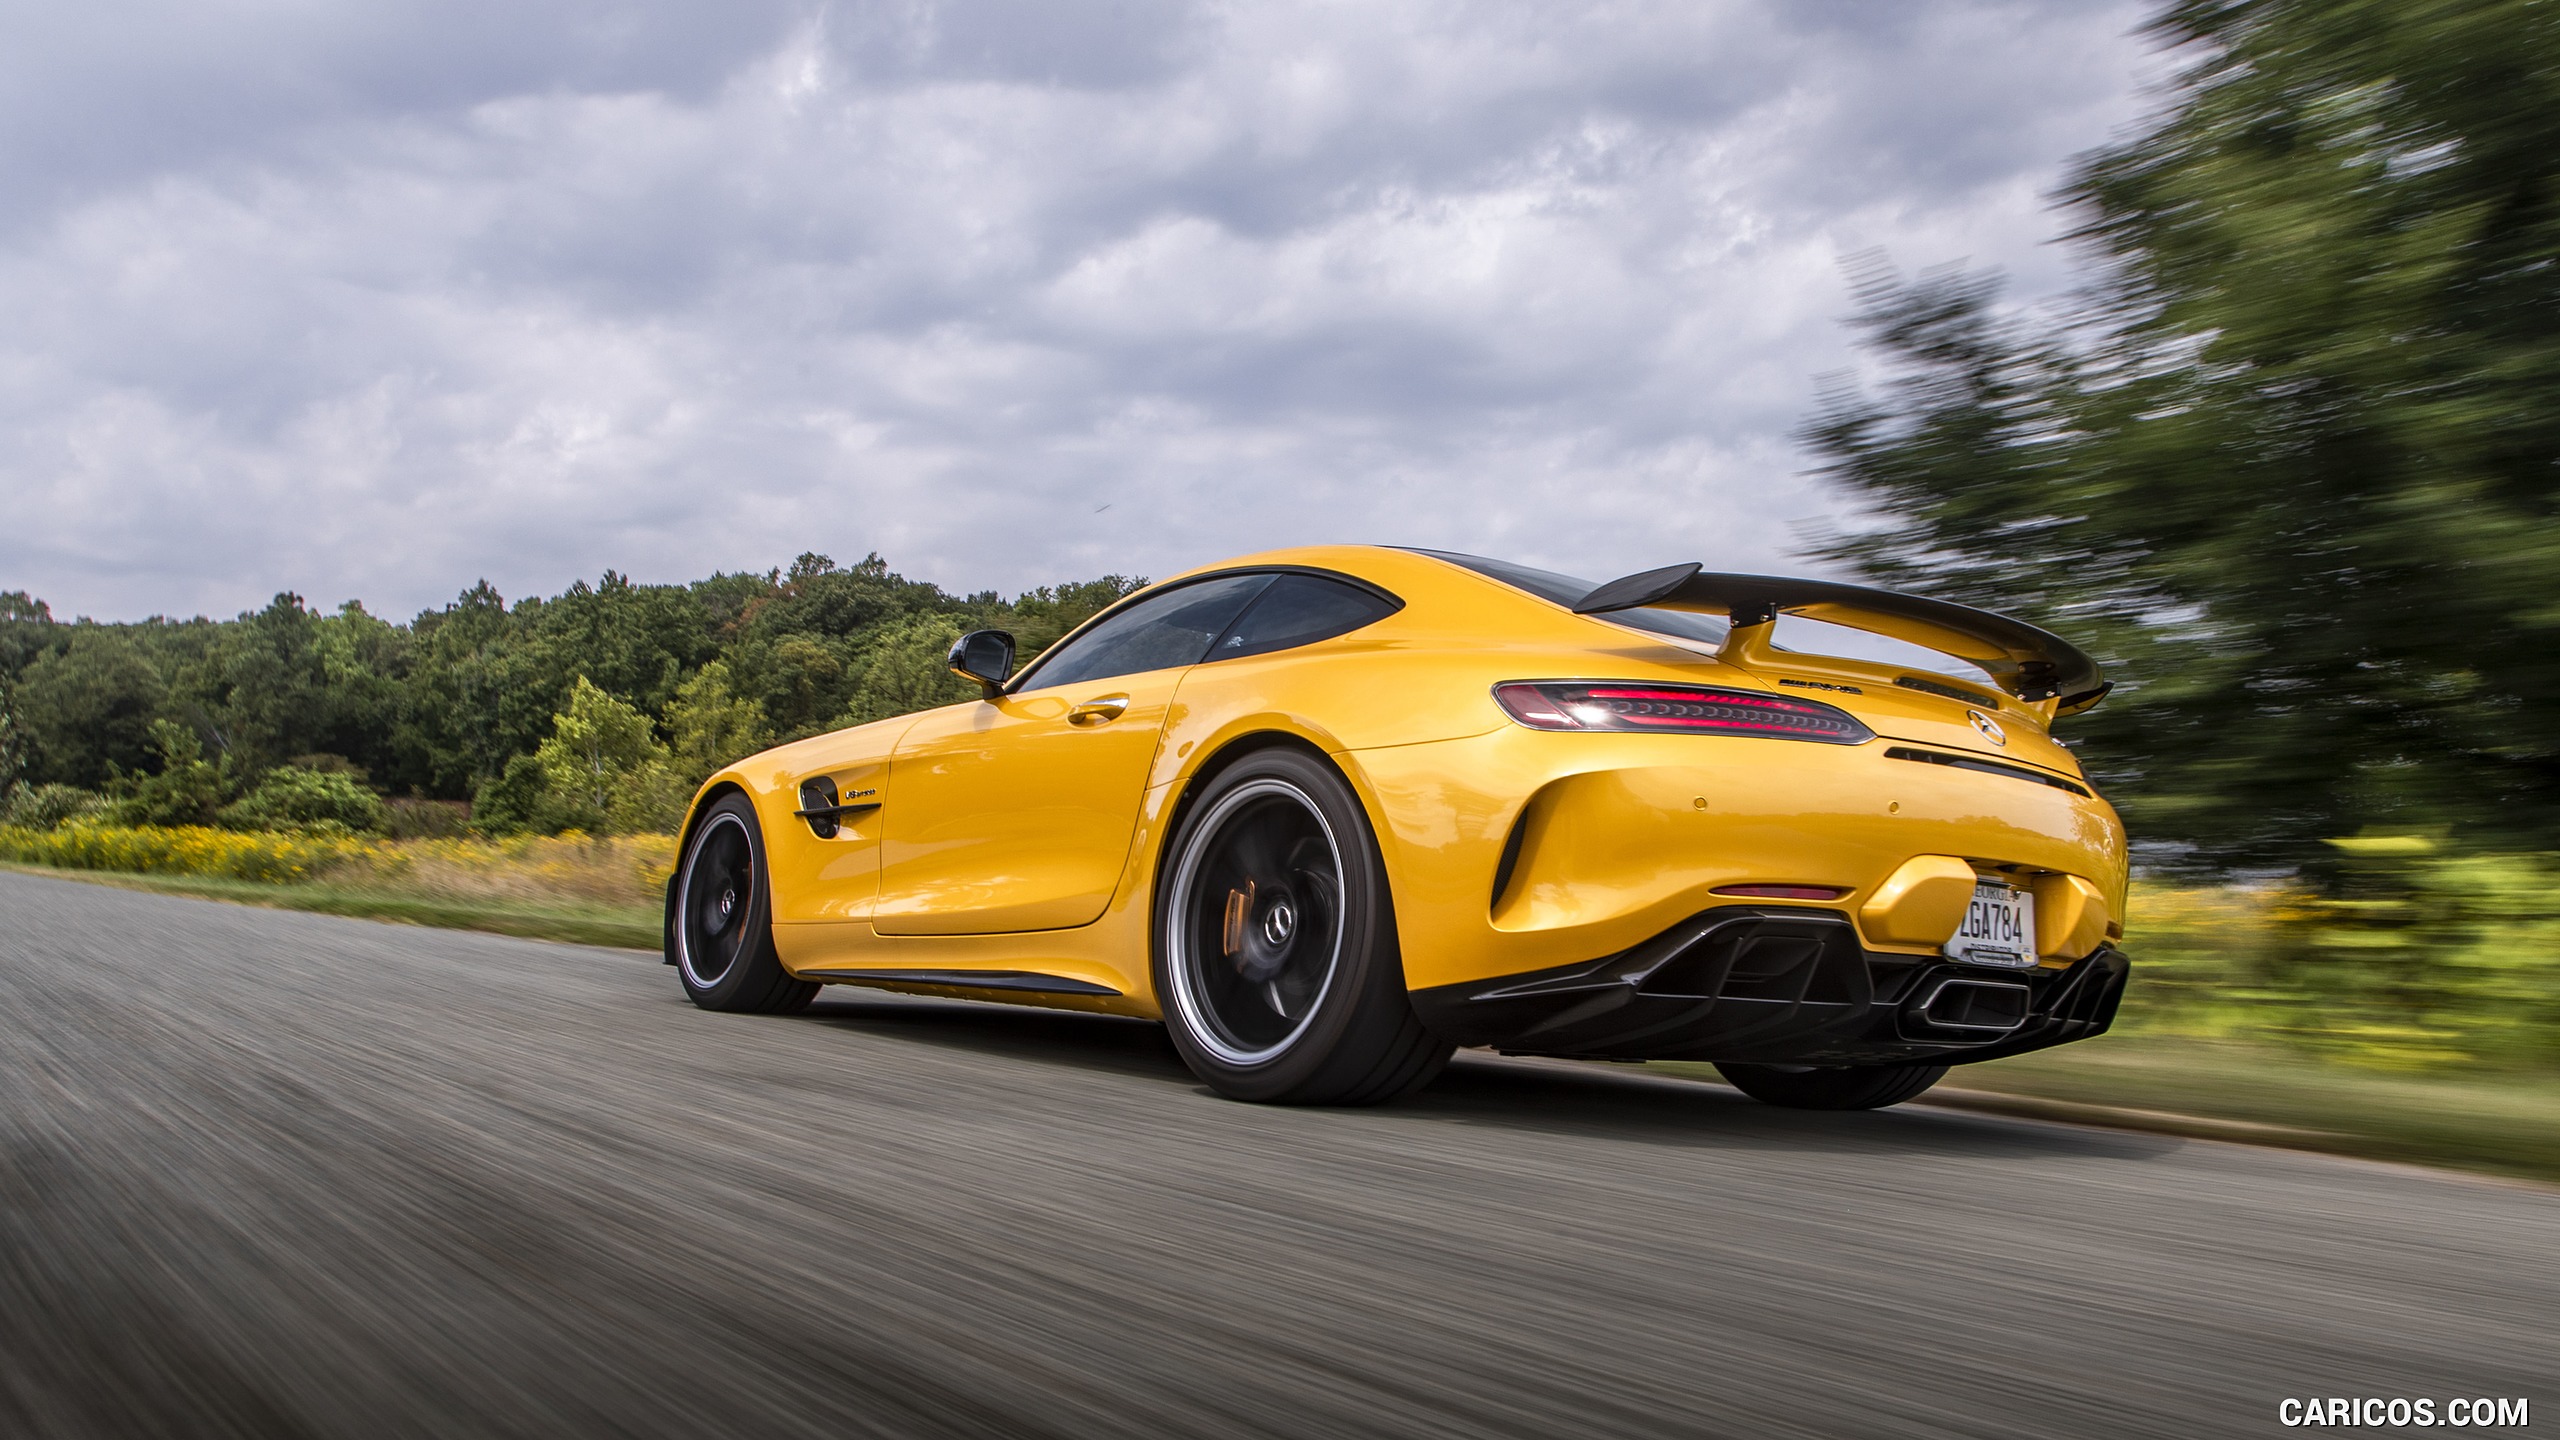 2020 Mercedes-AMG GT R Coupe (US-Spec) - Rear Three-Quarter, #264 of 328